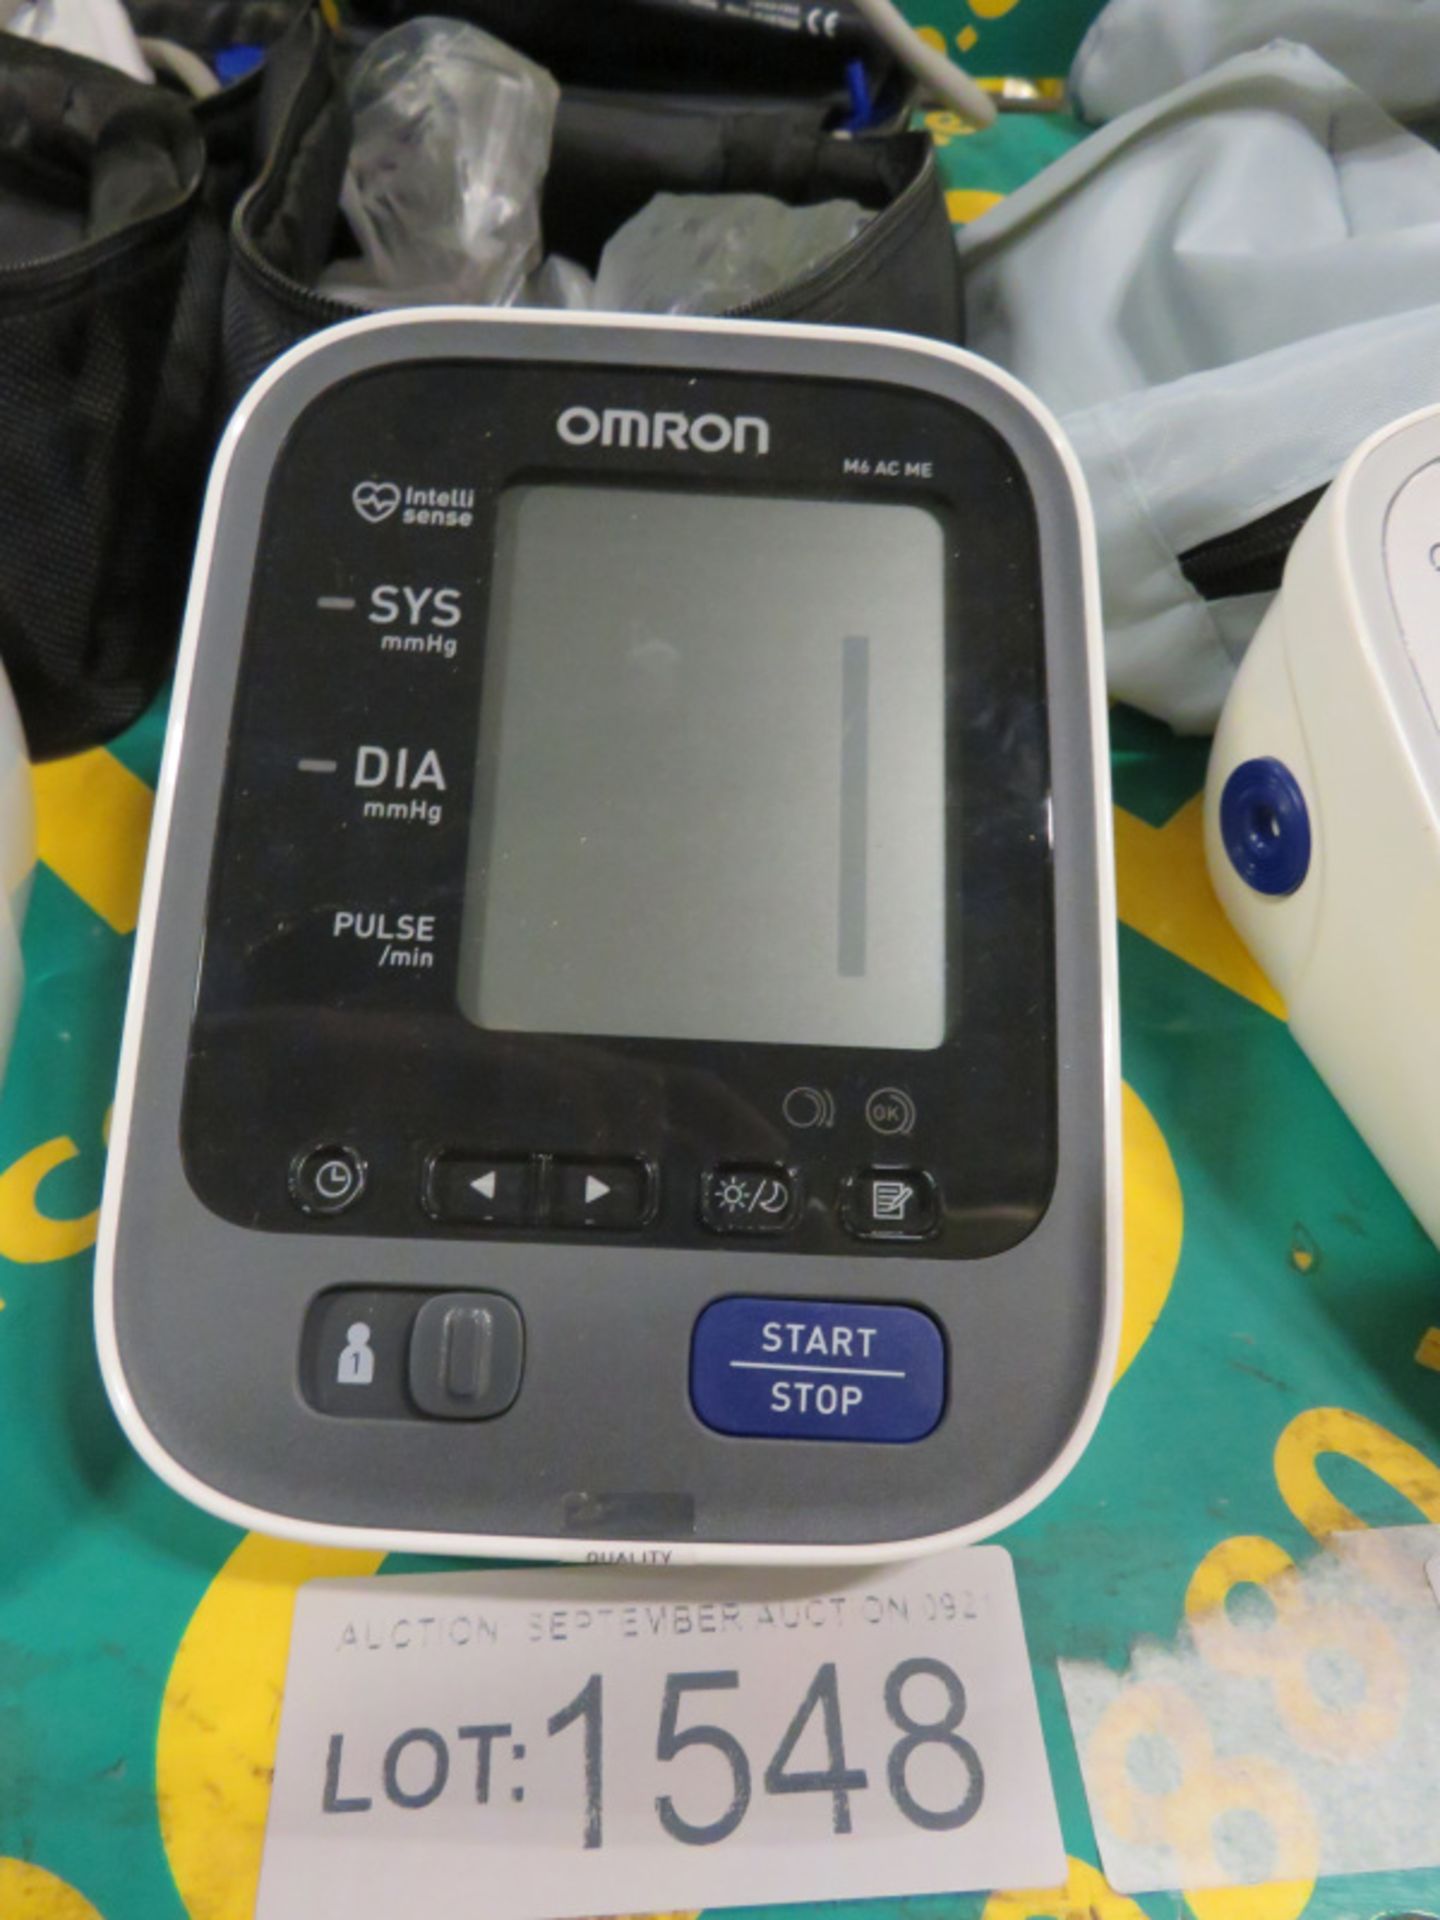 Omron M6 AC ME Intelli Sense Blood Pressure Monitor with case - Image 2 of 2